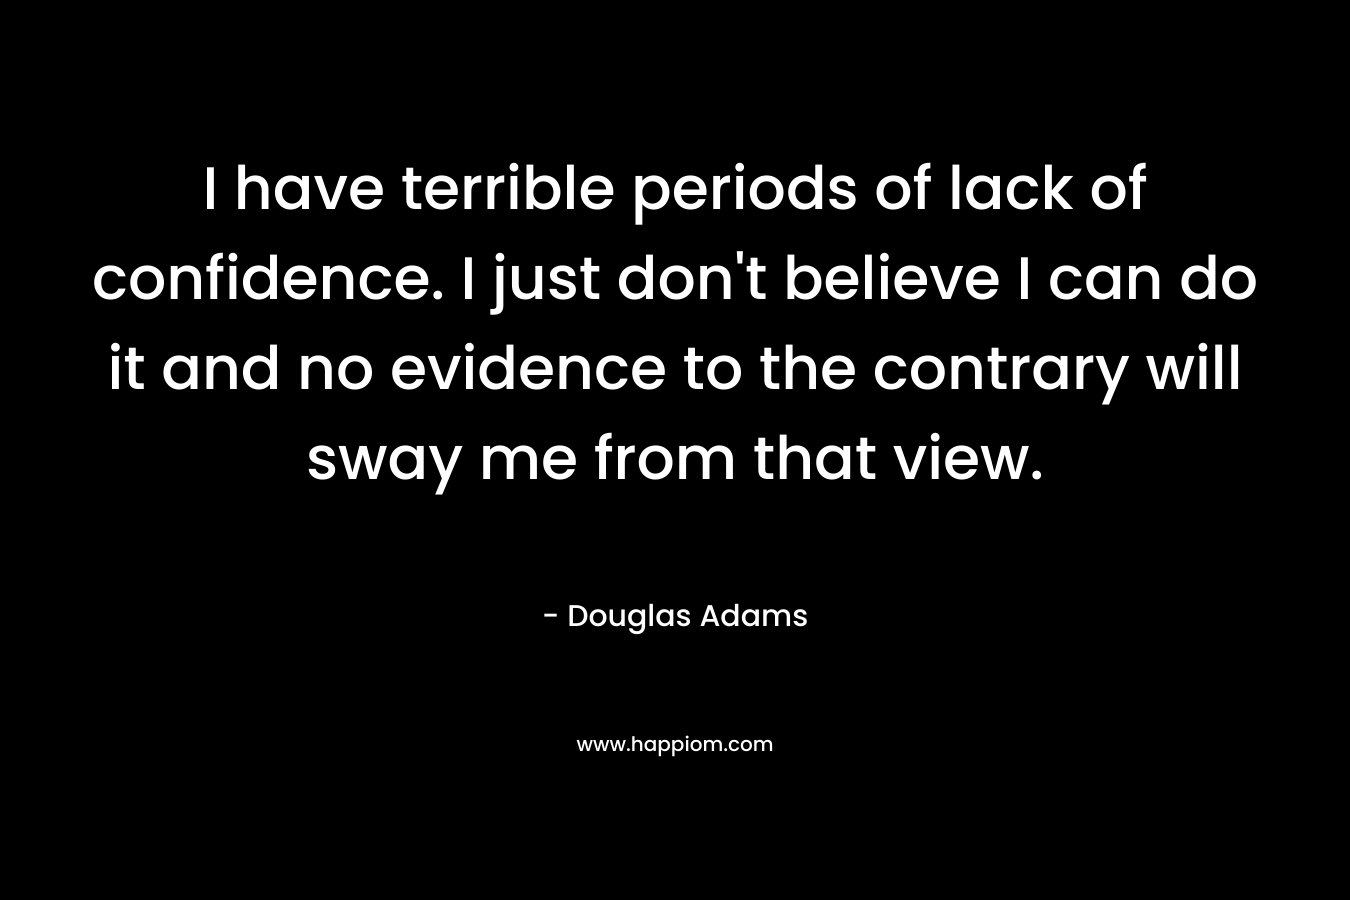 I have terrible periods of lack of confidence. I just don’t believe I can do it and no evidence to the contrary will sway me from that view. – Douglas Adams